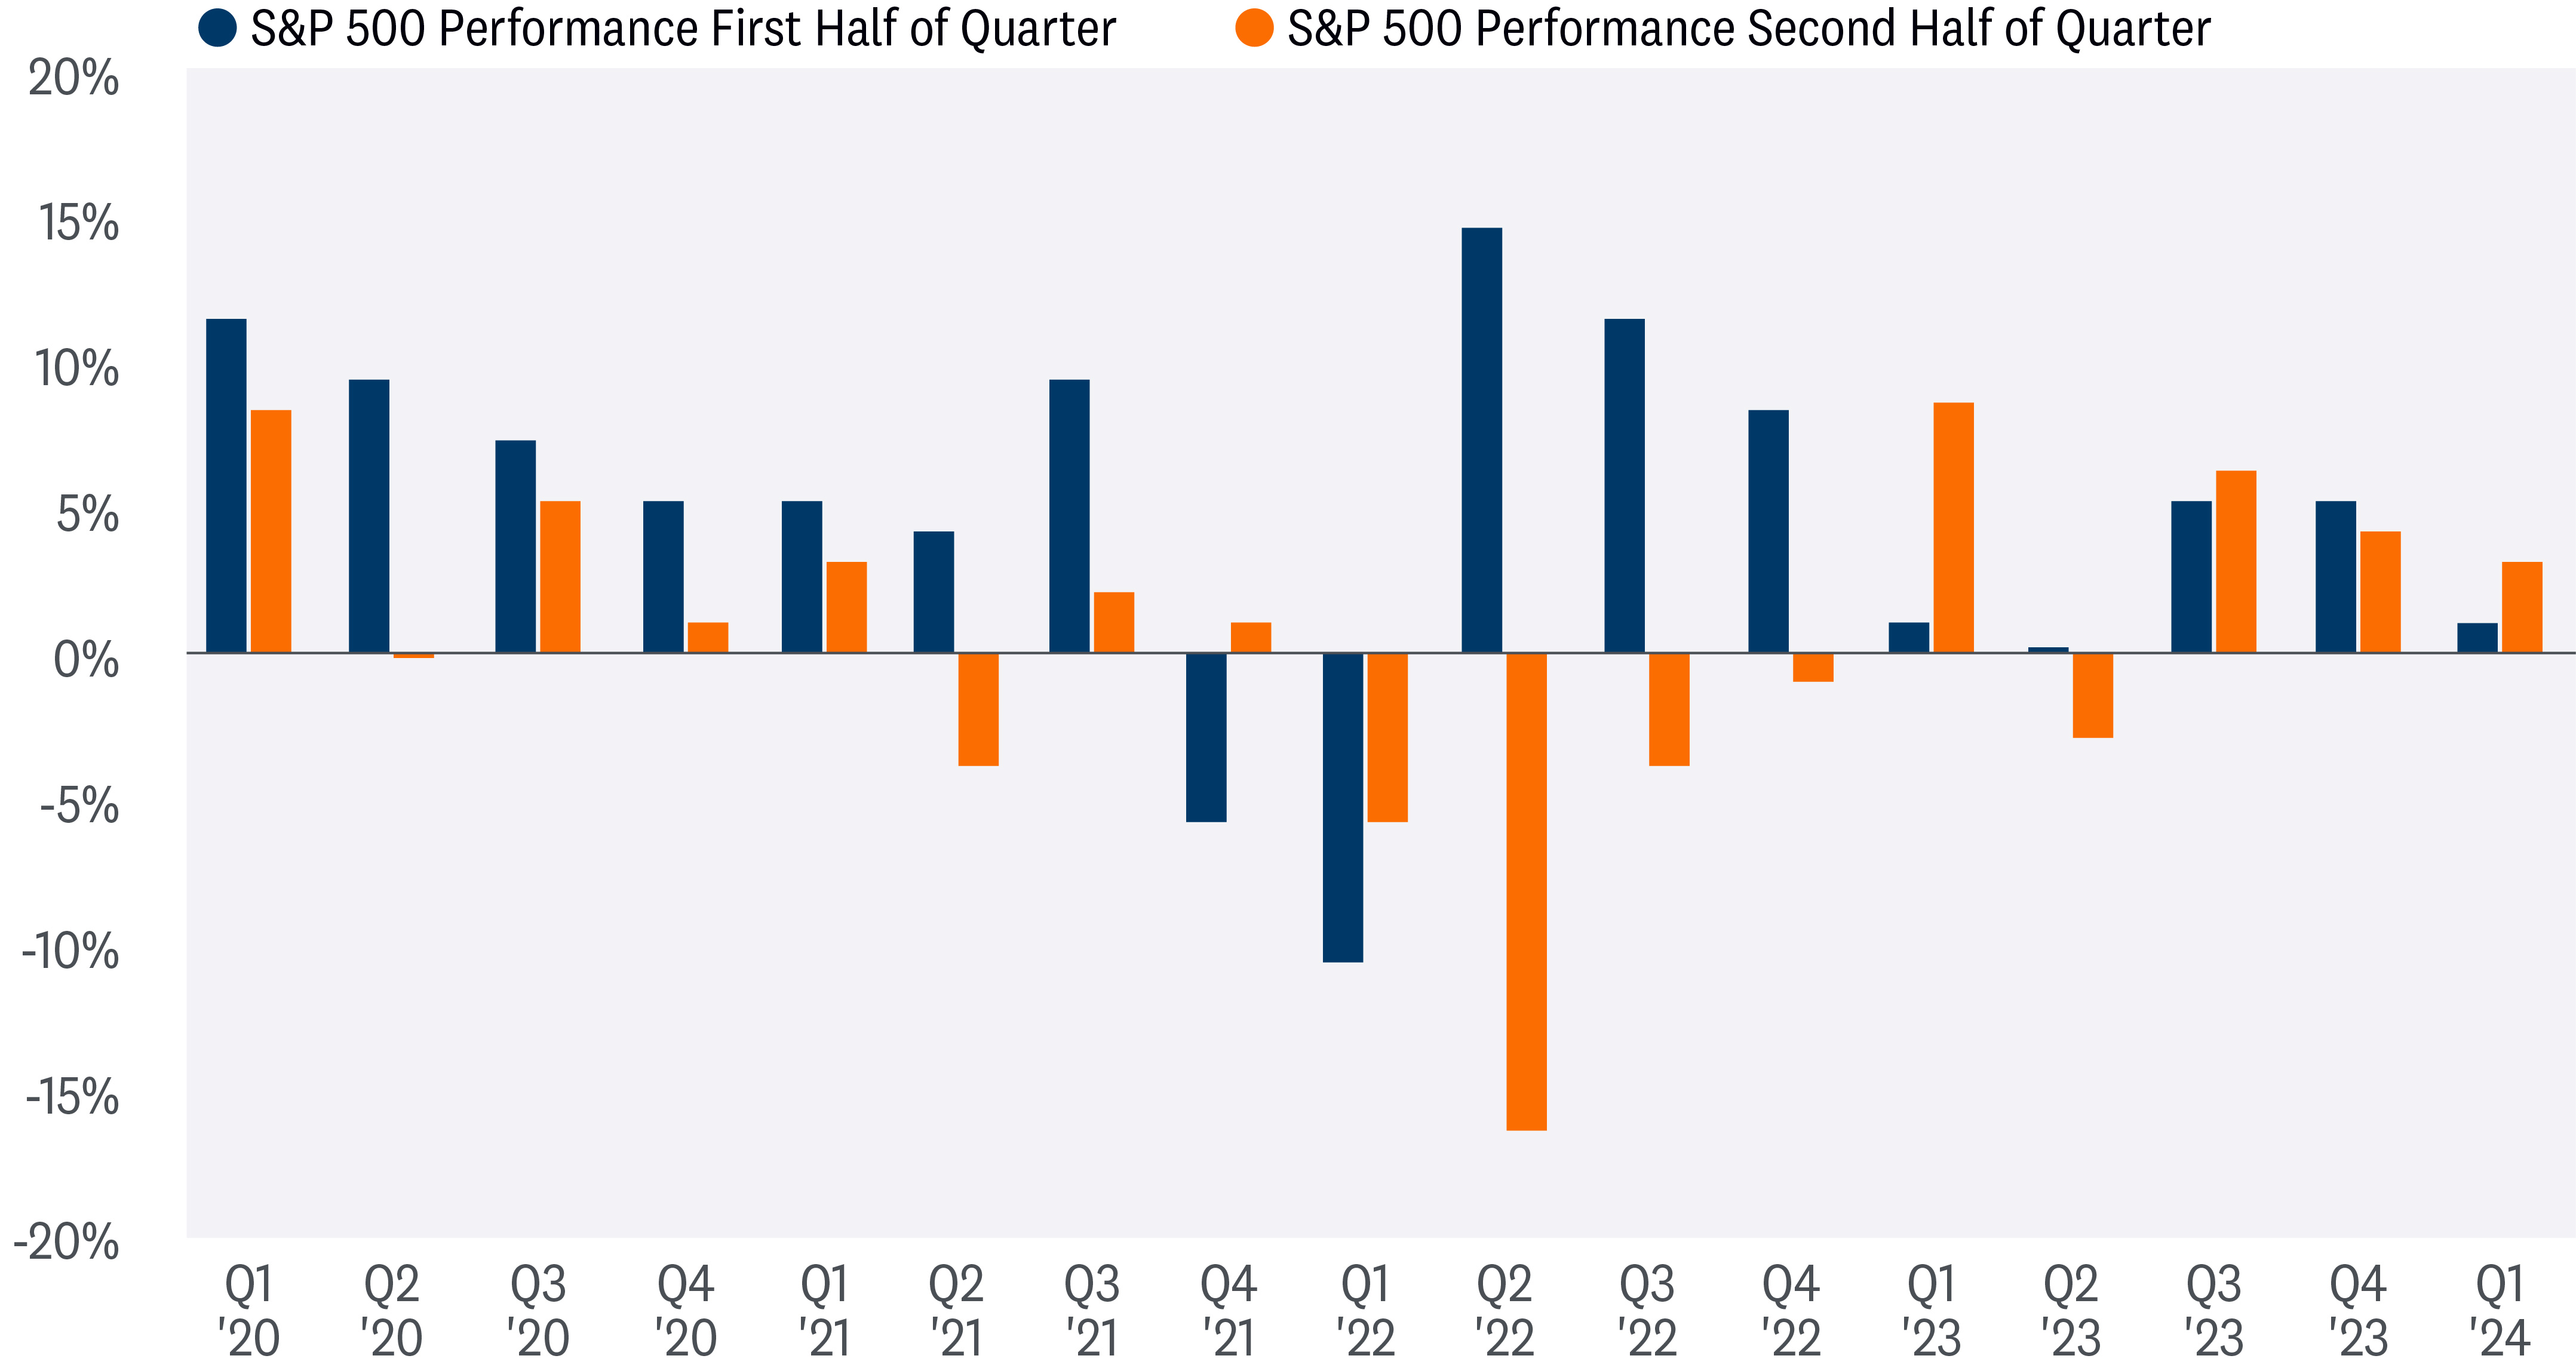 The chart depicts the performance of the S&P 500 index over time. The x-axis represents the quarters from Q1 2020 to Q1 2024. The y-axis represents the percentage change in the index. The blue bars represent the performance of the S&P 500 in the first half of each quarter, while the orange bars represent the performance in the second half of each quarter.